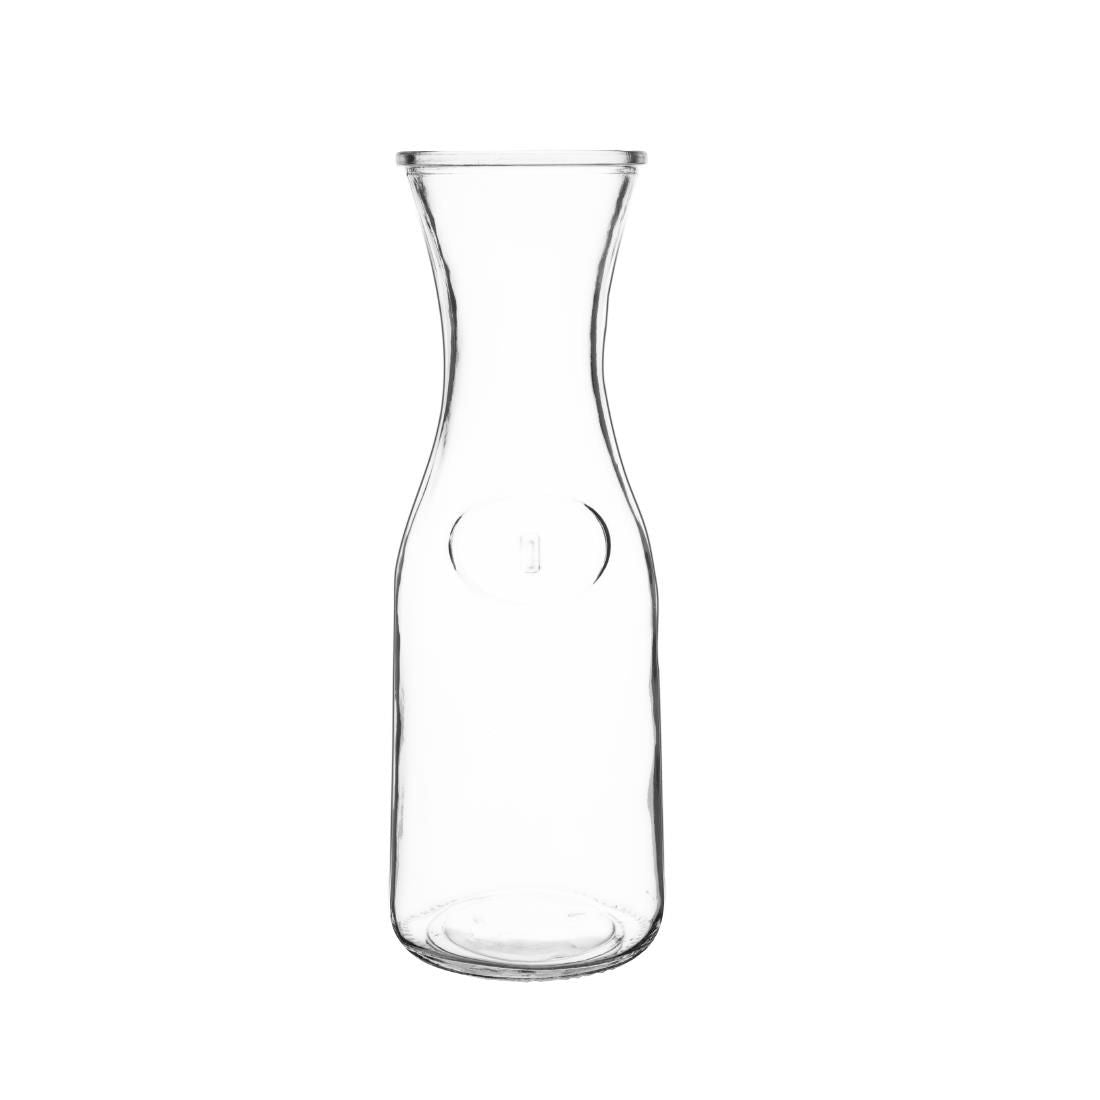 GG928 Olympia Glass Carafe 1Ltr (Pack of 6) JD Catering Equipment Solutions Ltd